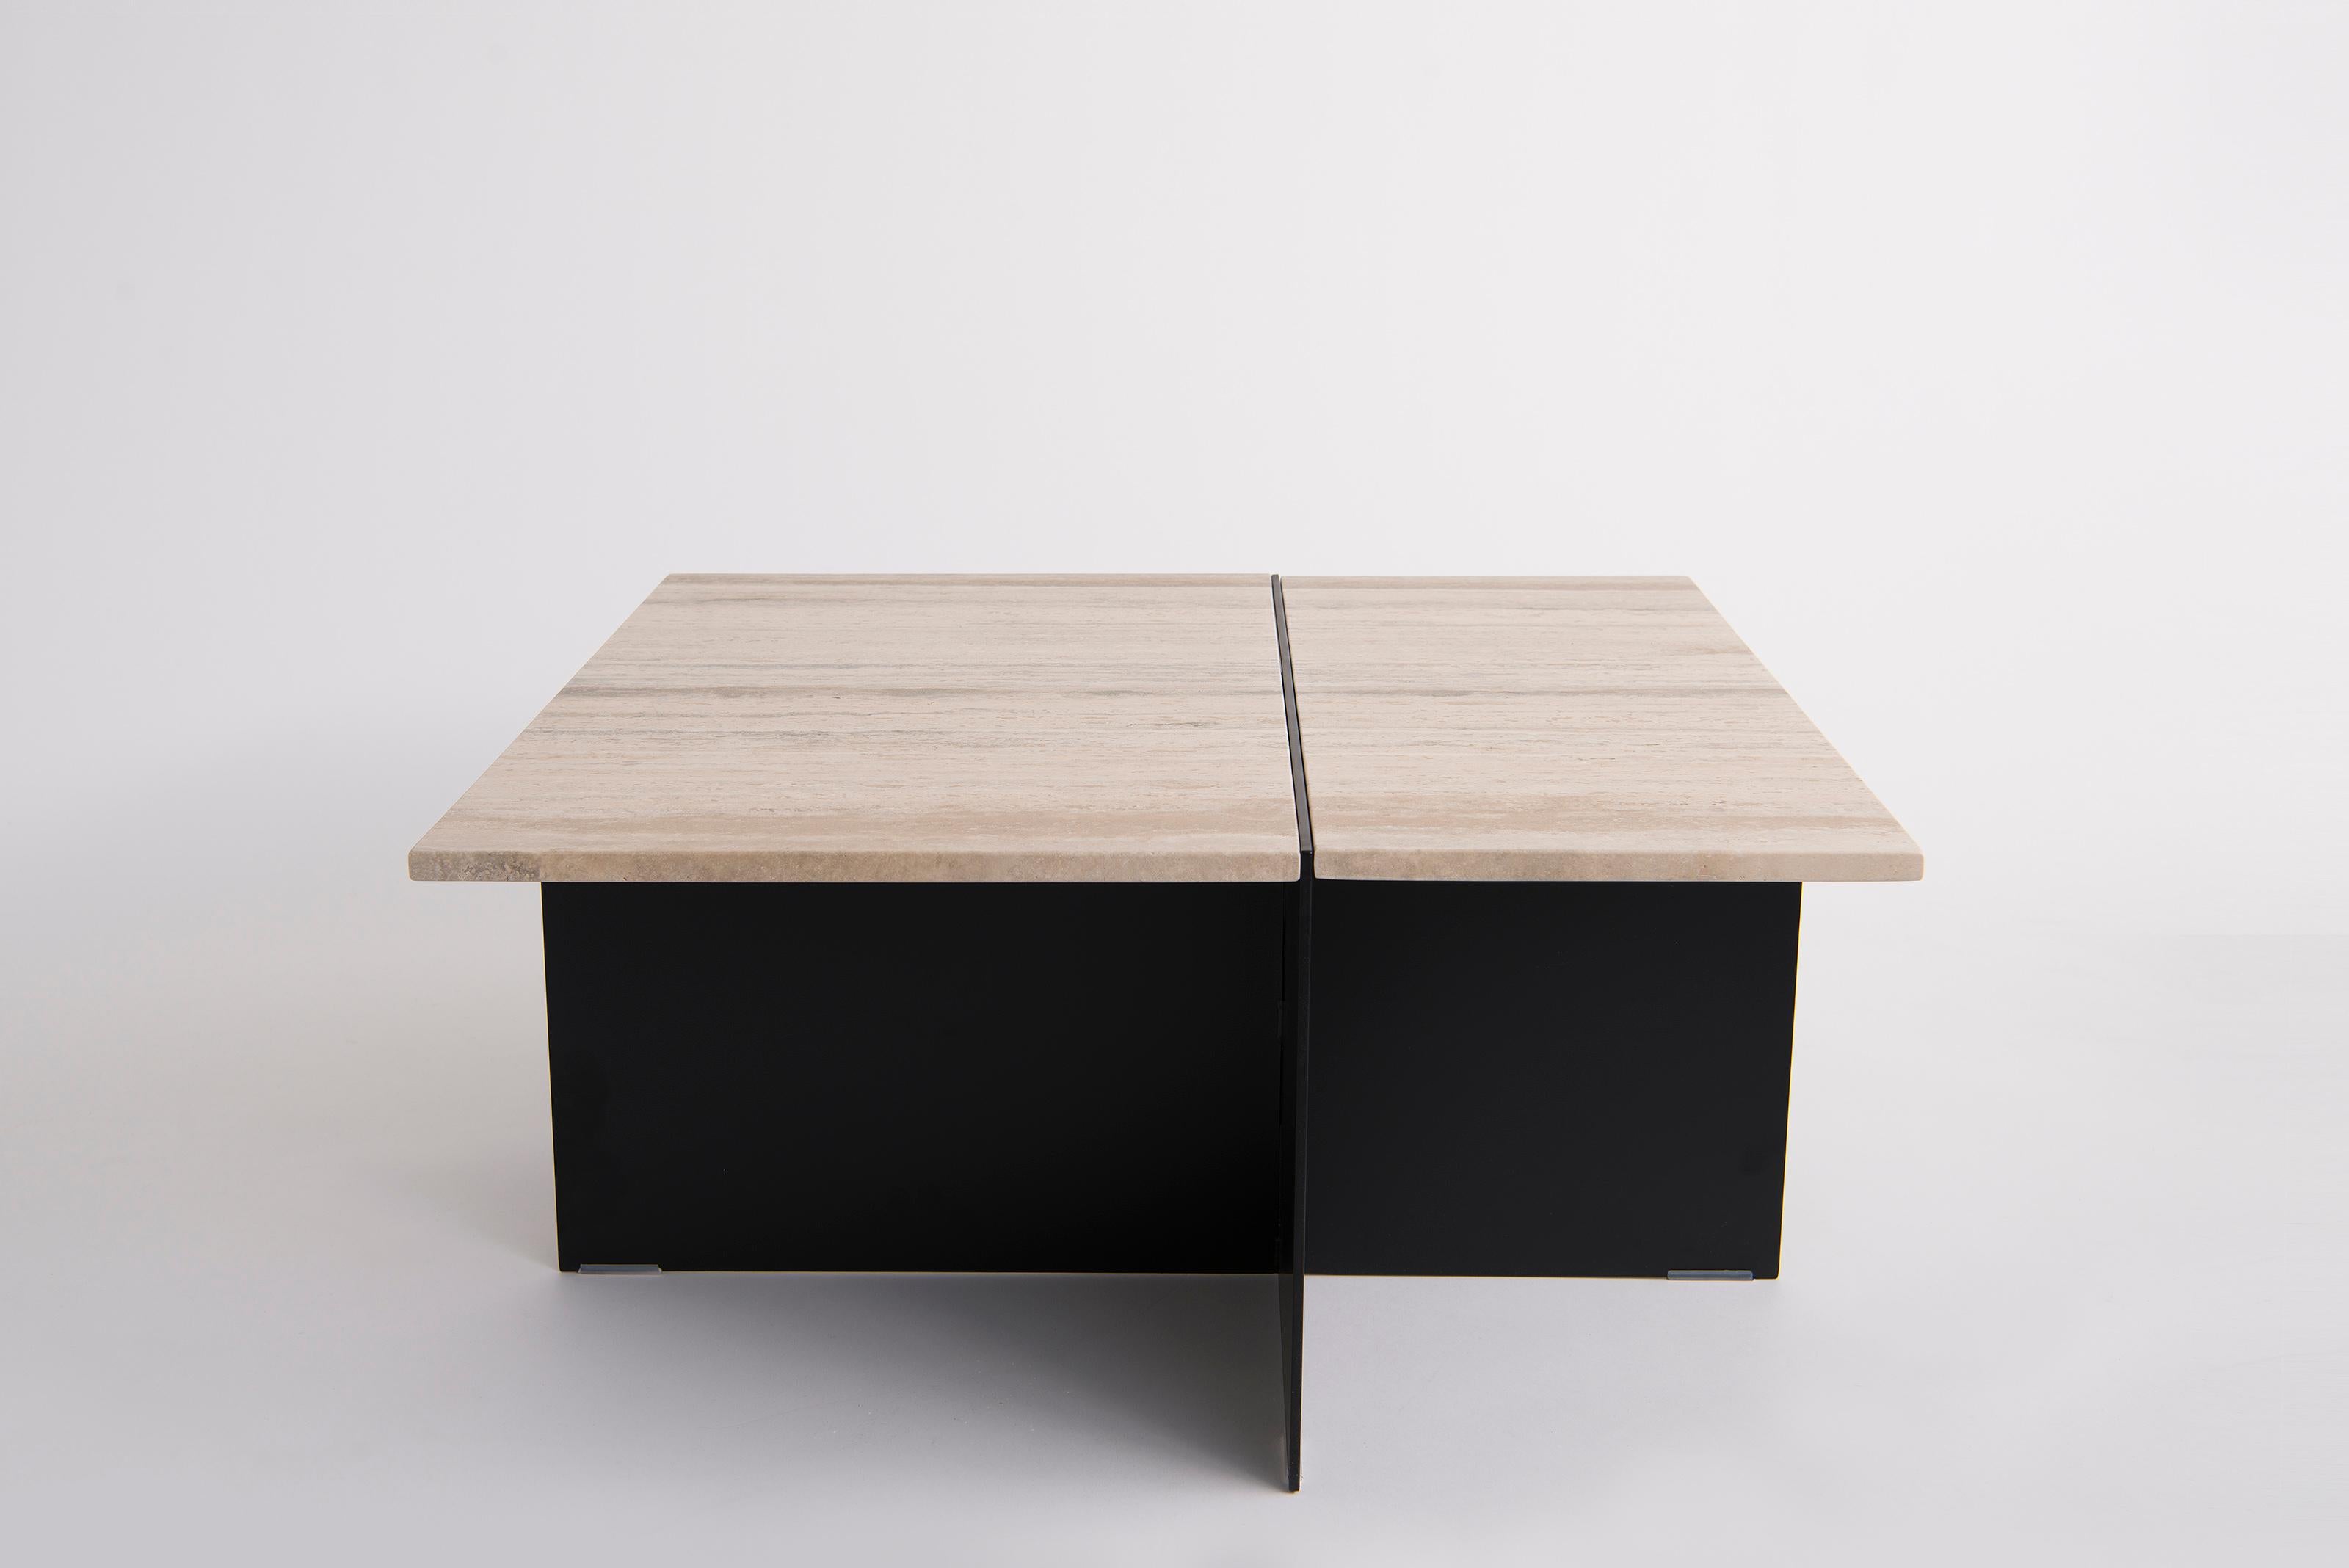 Division Square Coffee Table by Phase Design
Dimensions: D 81,3 x W 81,3 x H 38,1 cm. 
Materials: Powder-coated solid steel and travertine.

Solid steel sheet available in a flat black or white powder coat finish. Powder coat finishes are available